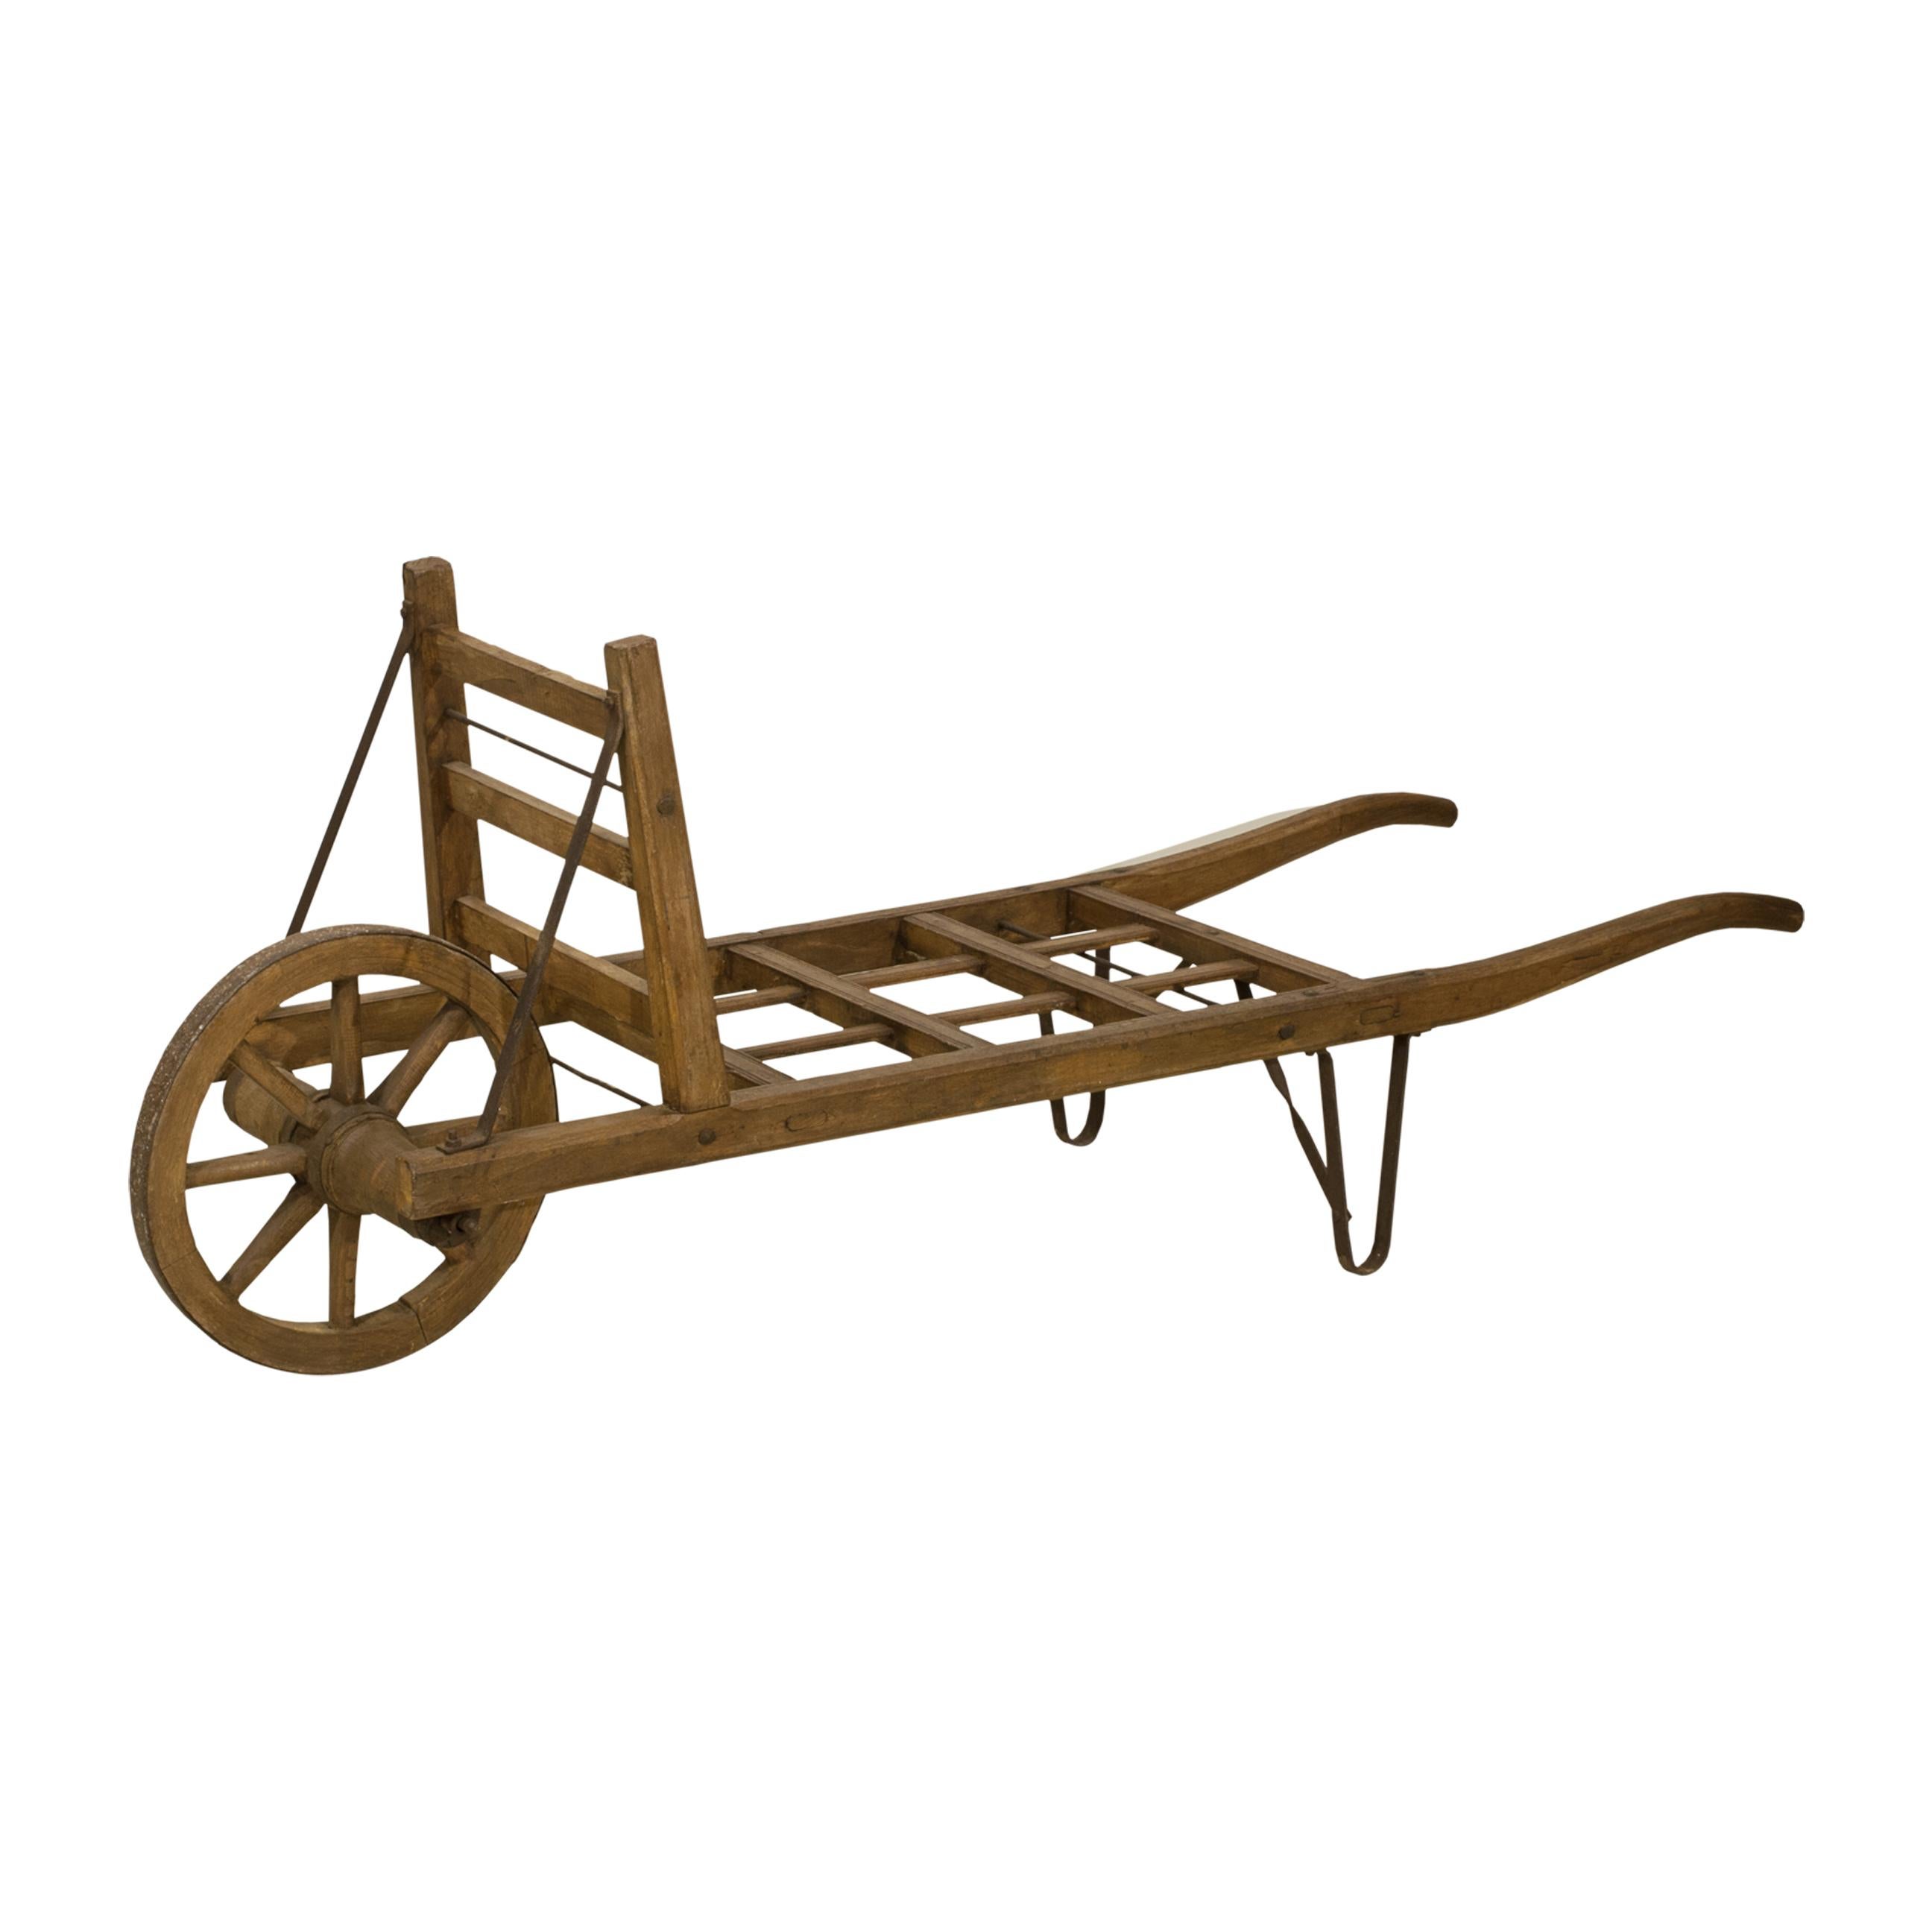 Antique Porters Trolly With Luggage, Hay Wheelbarrow.
A charming late 18th, early 19th century wooden barrow, made of beechwood with single wooden spoked front wheel with iron surround and two metal support feet to the rear. A great decorative piece